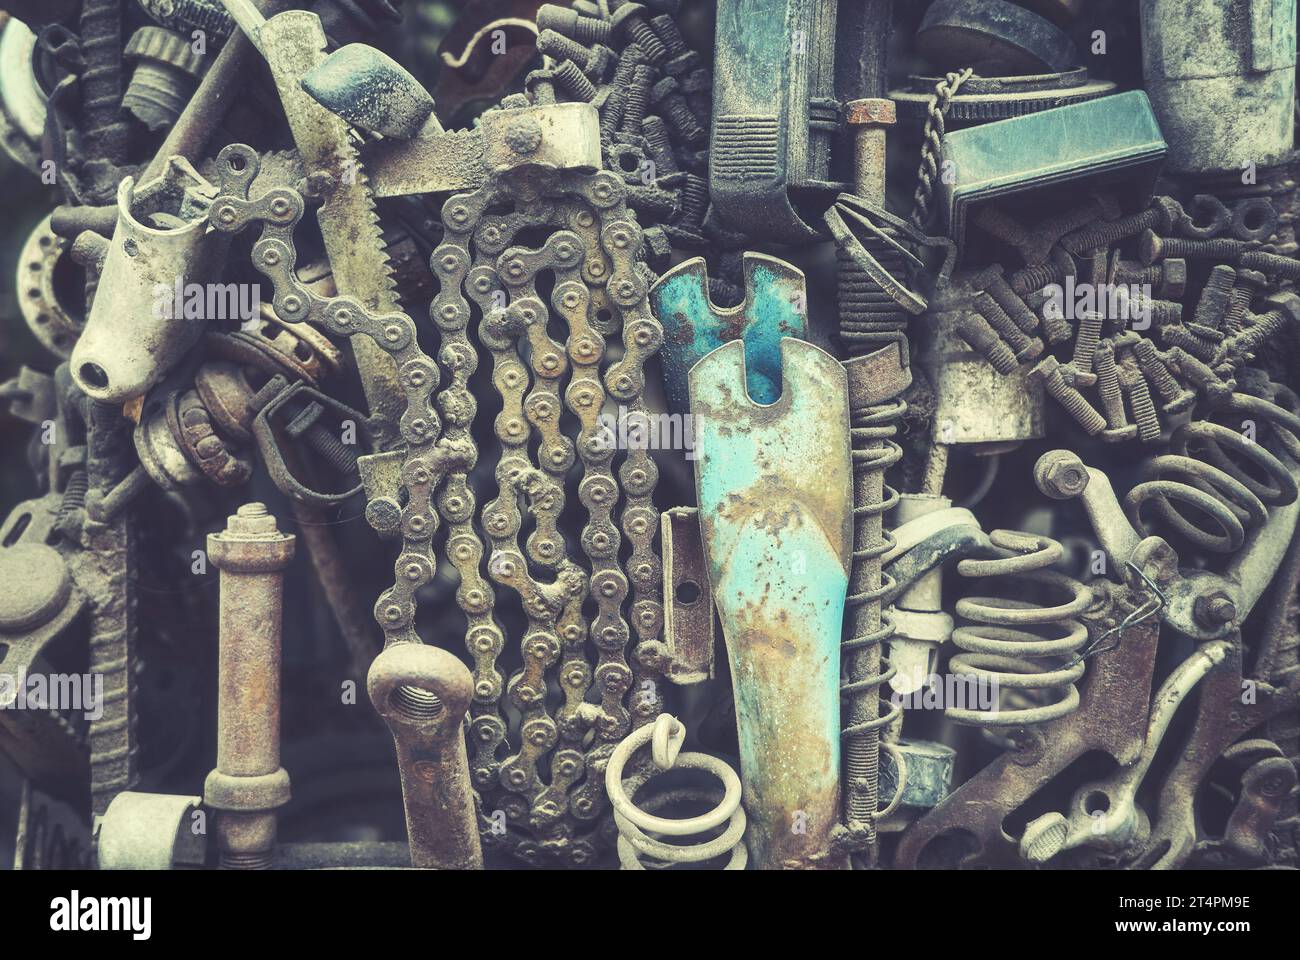 Abstract industrial background made of old machine parts, selective focus, color toning applied. Stock Photo